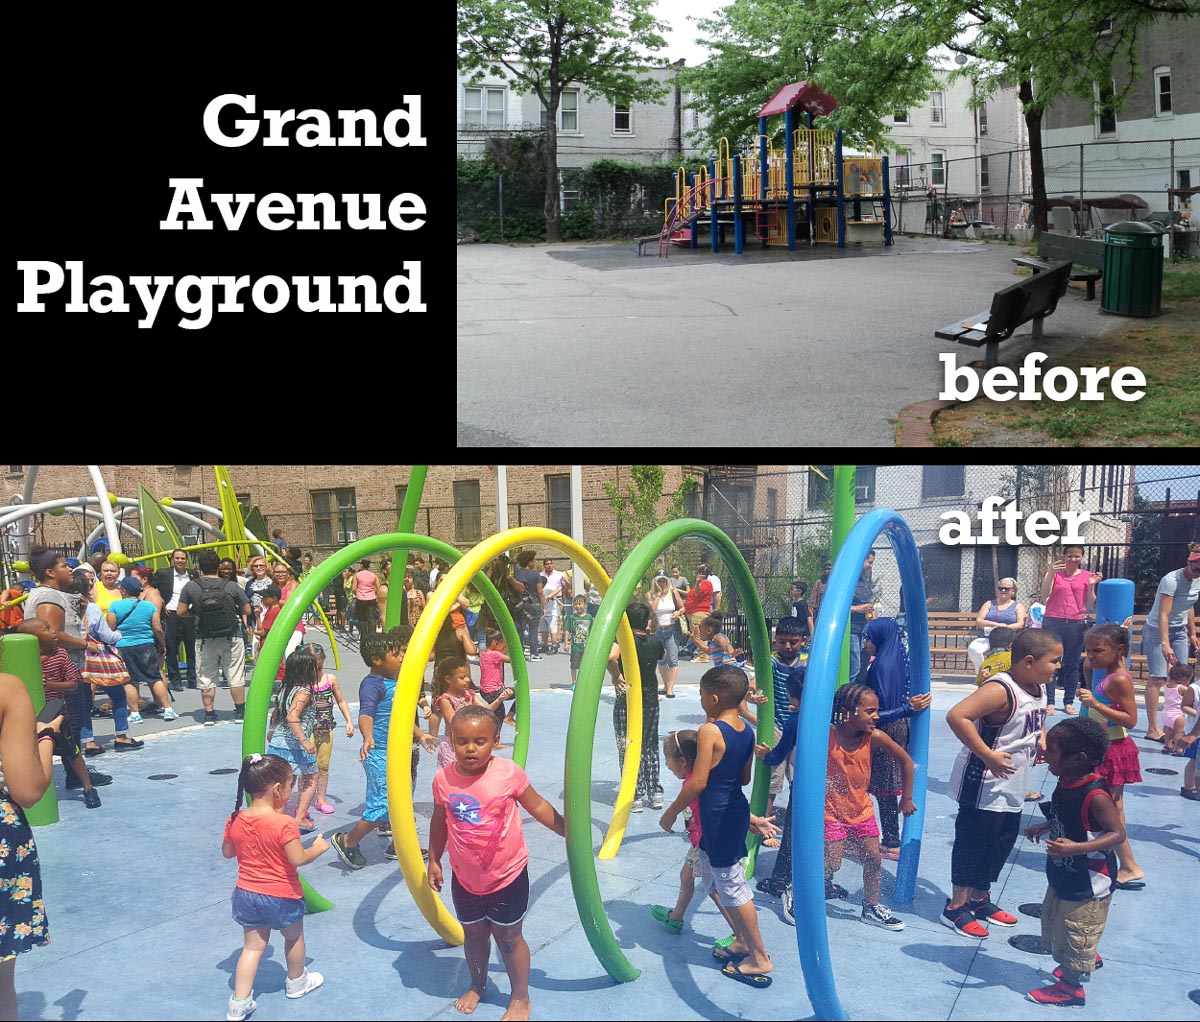 befor and after photos of Grand Avenue Playground in New York